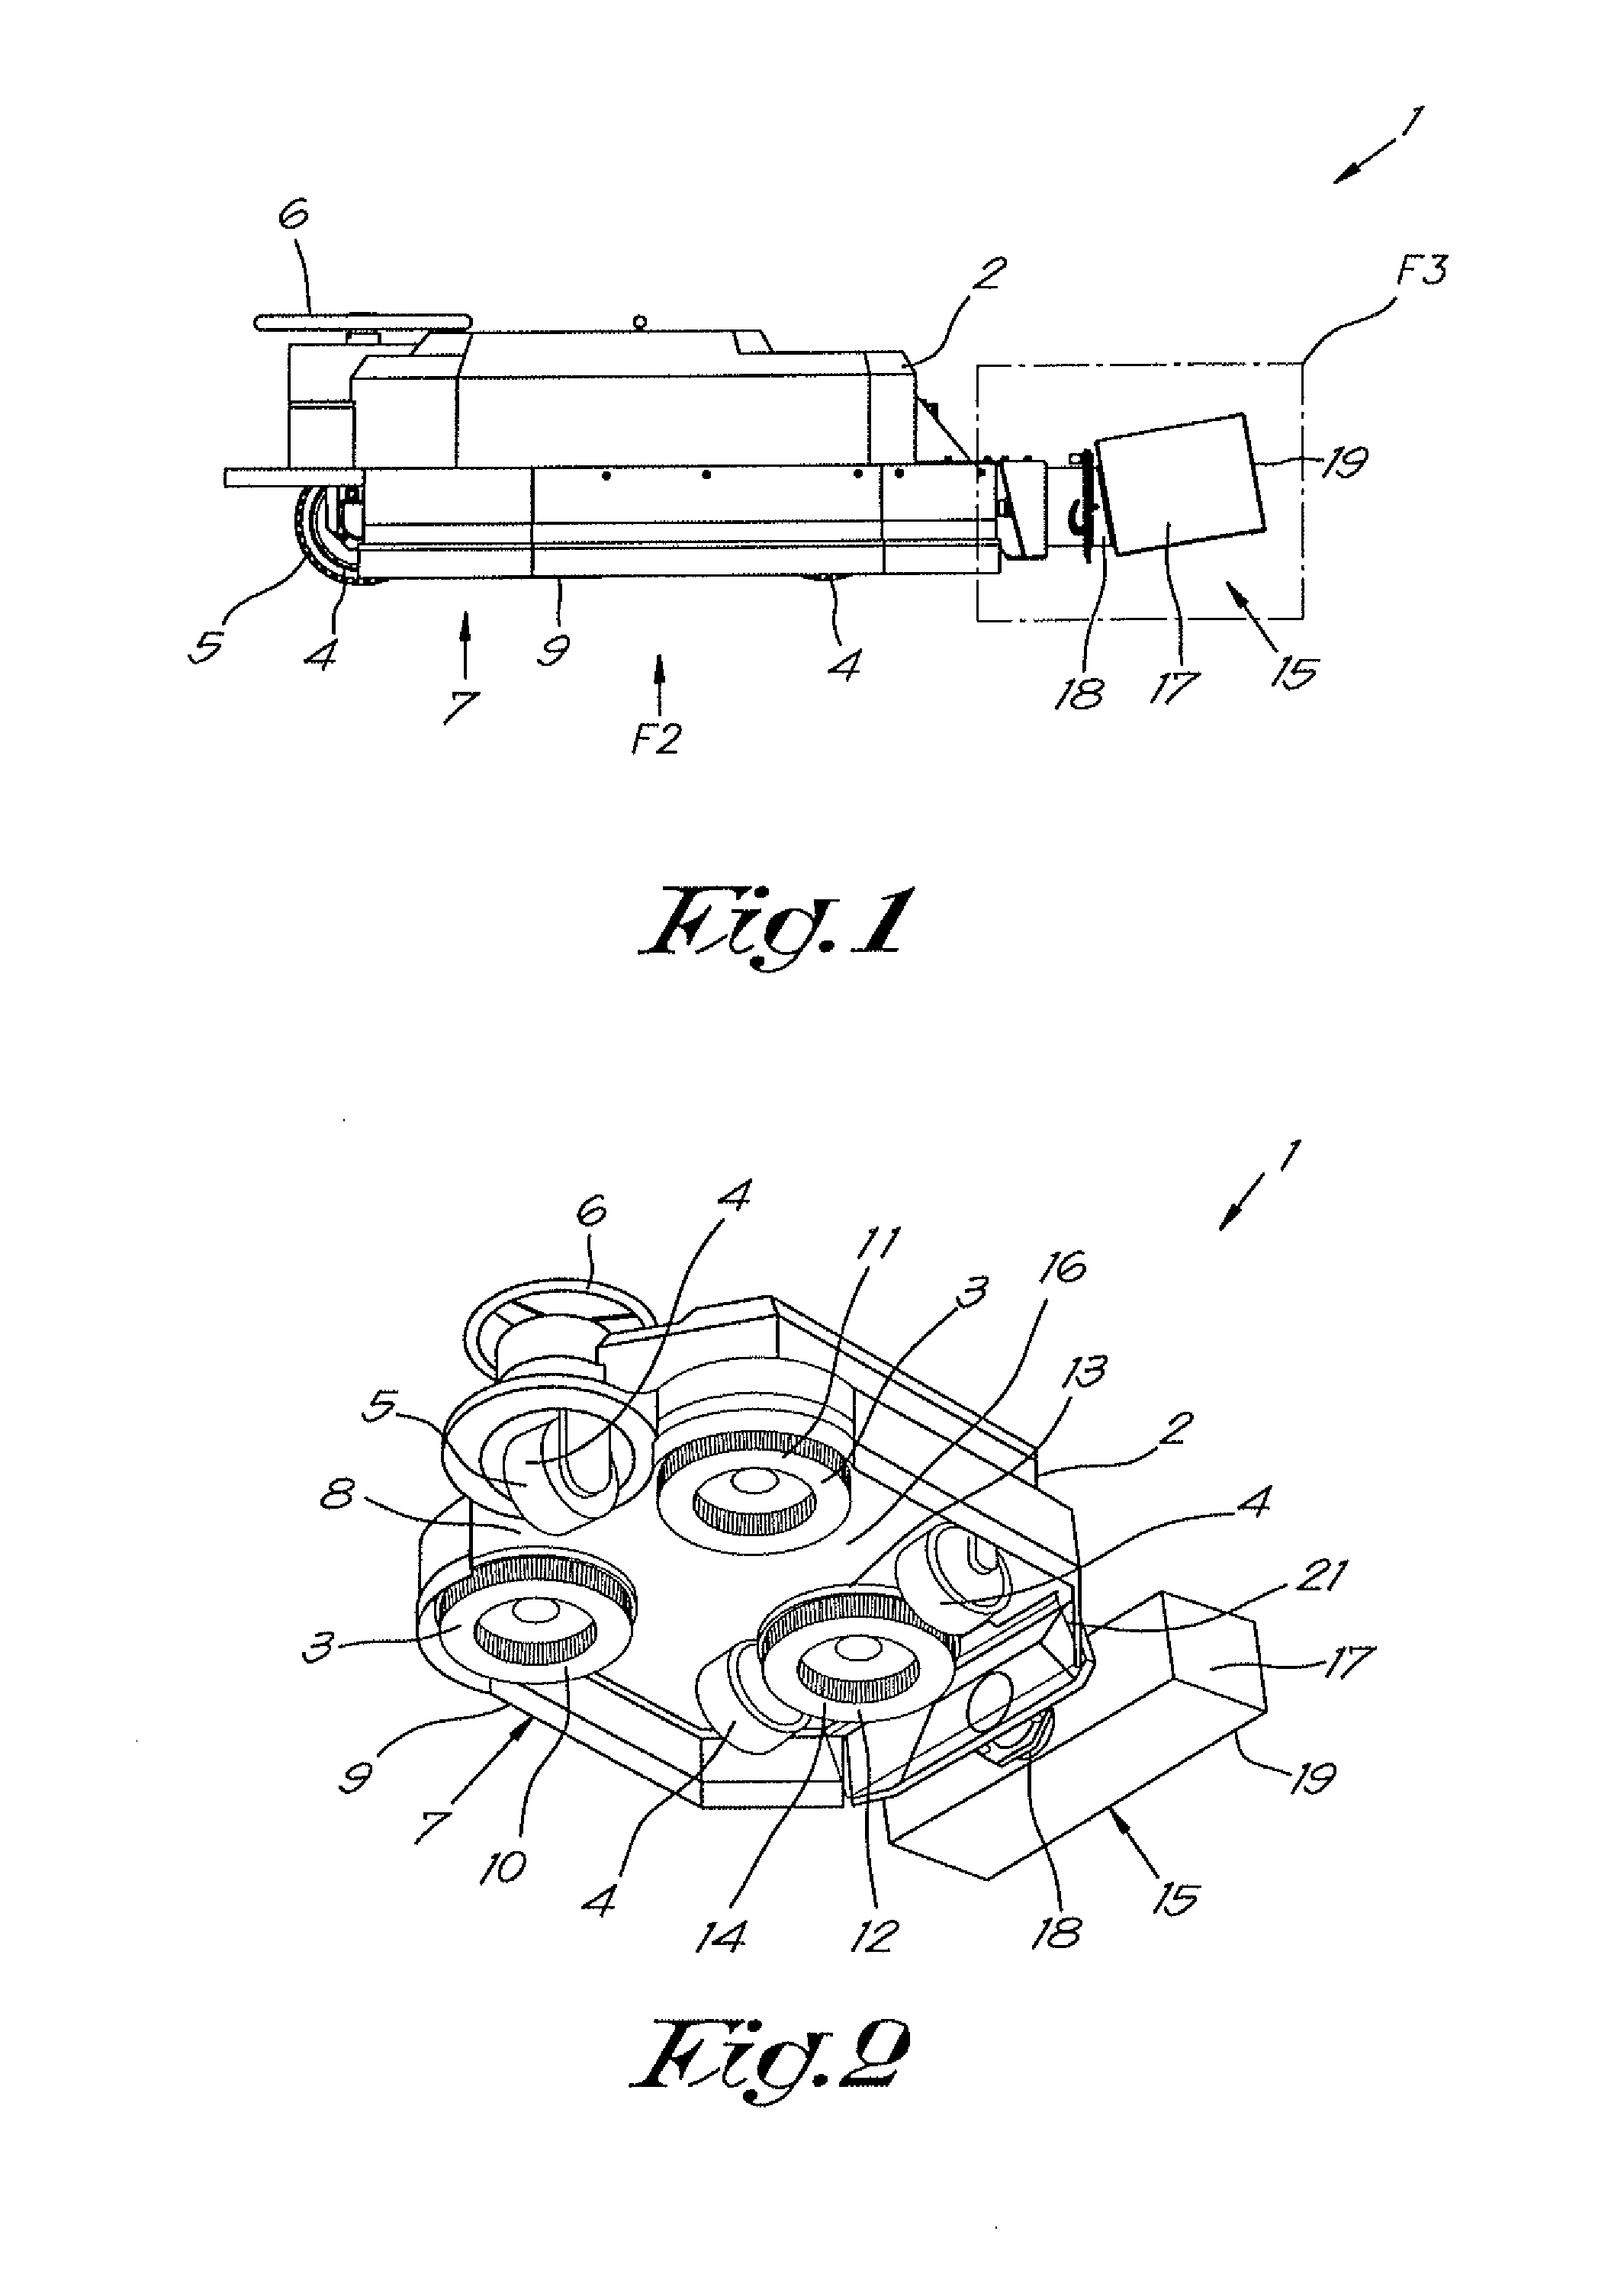 Recuperation system for underwater cleaning operations